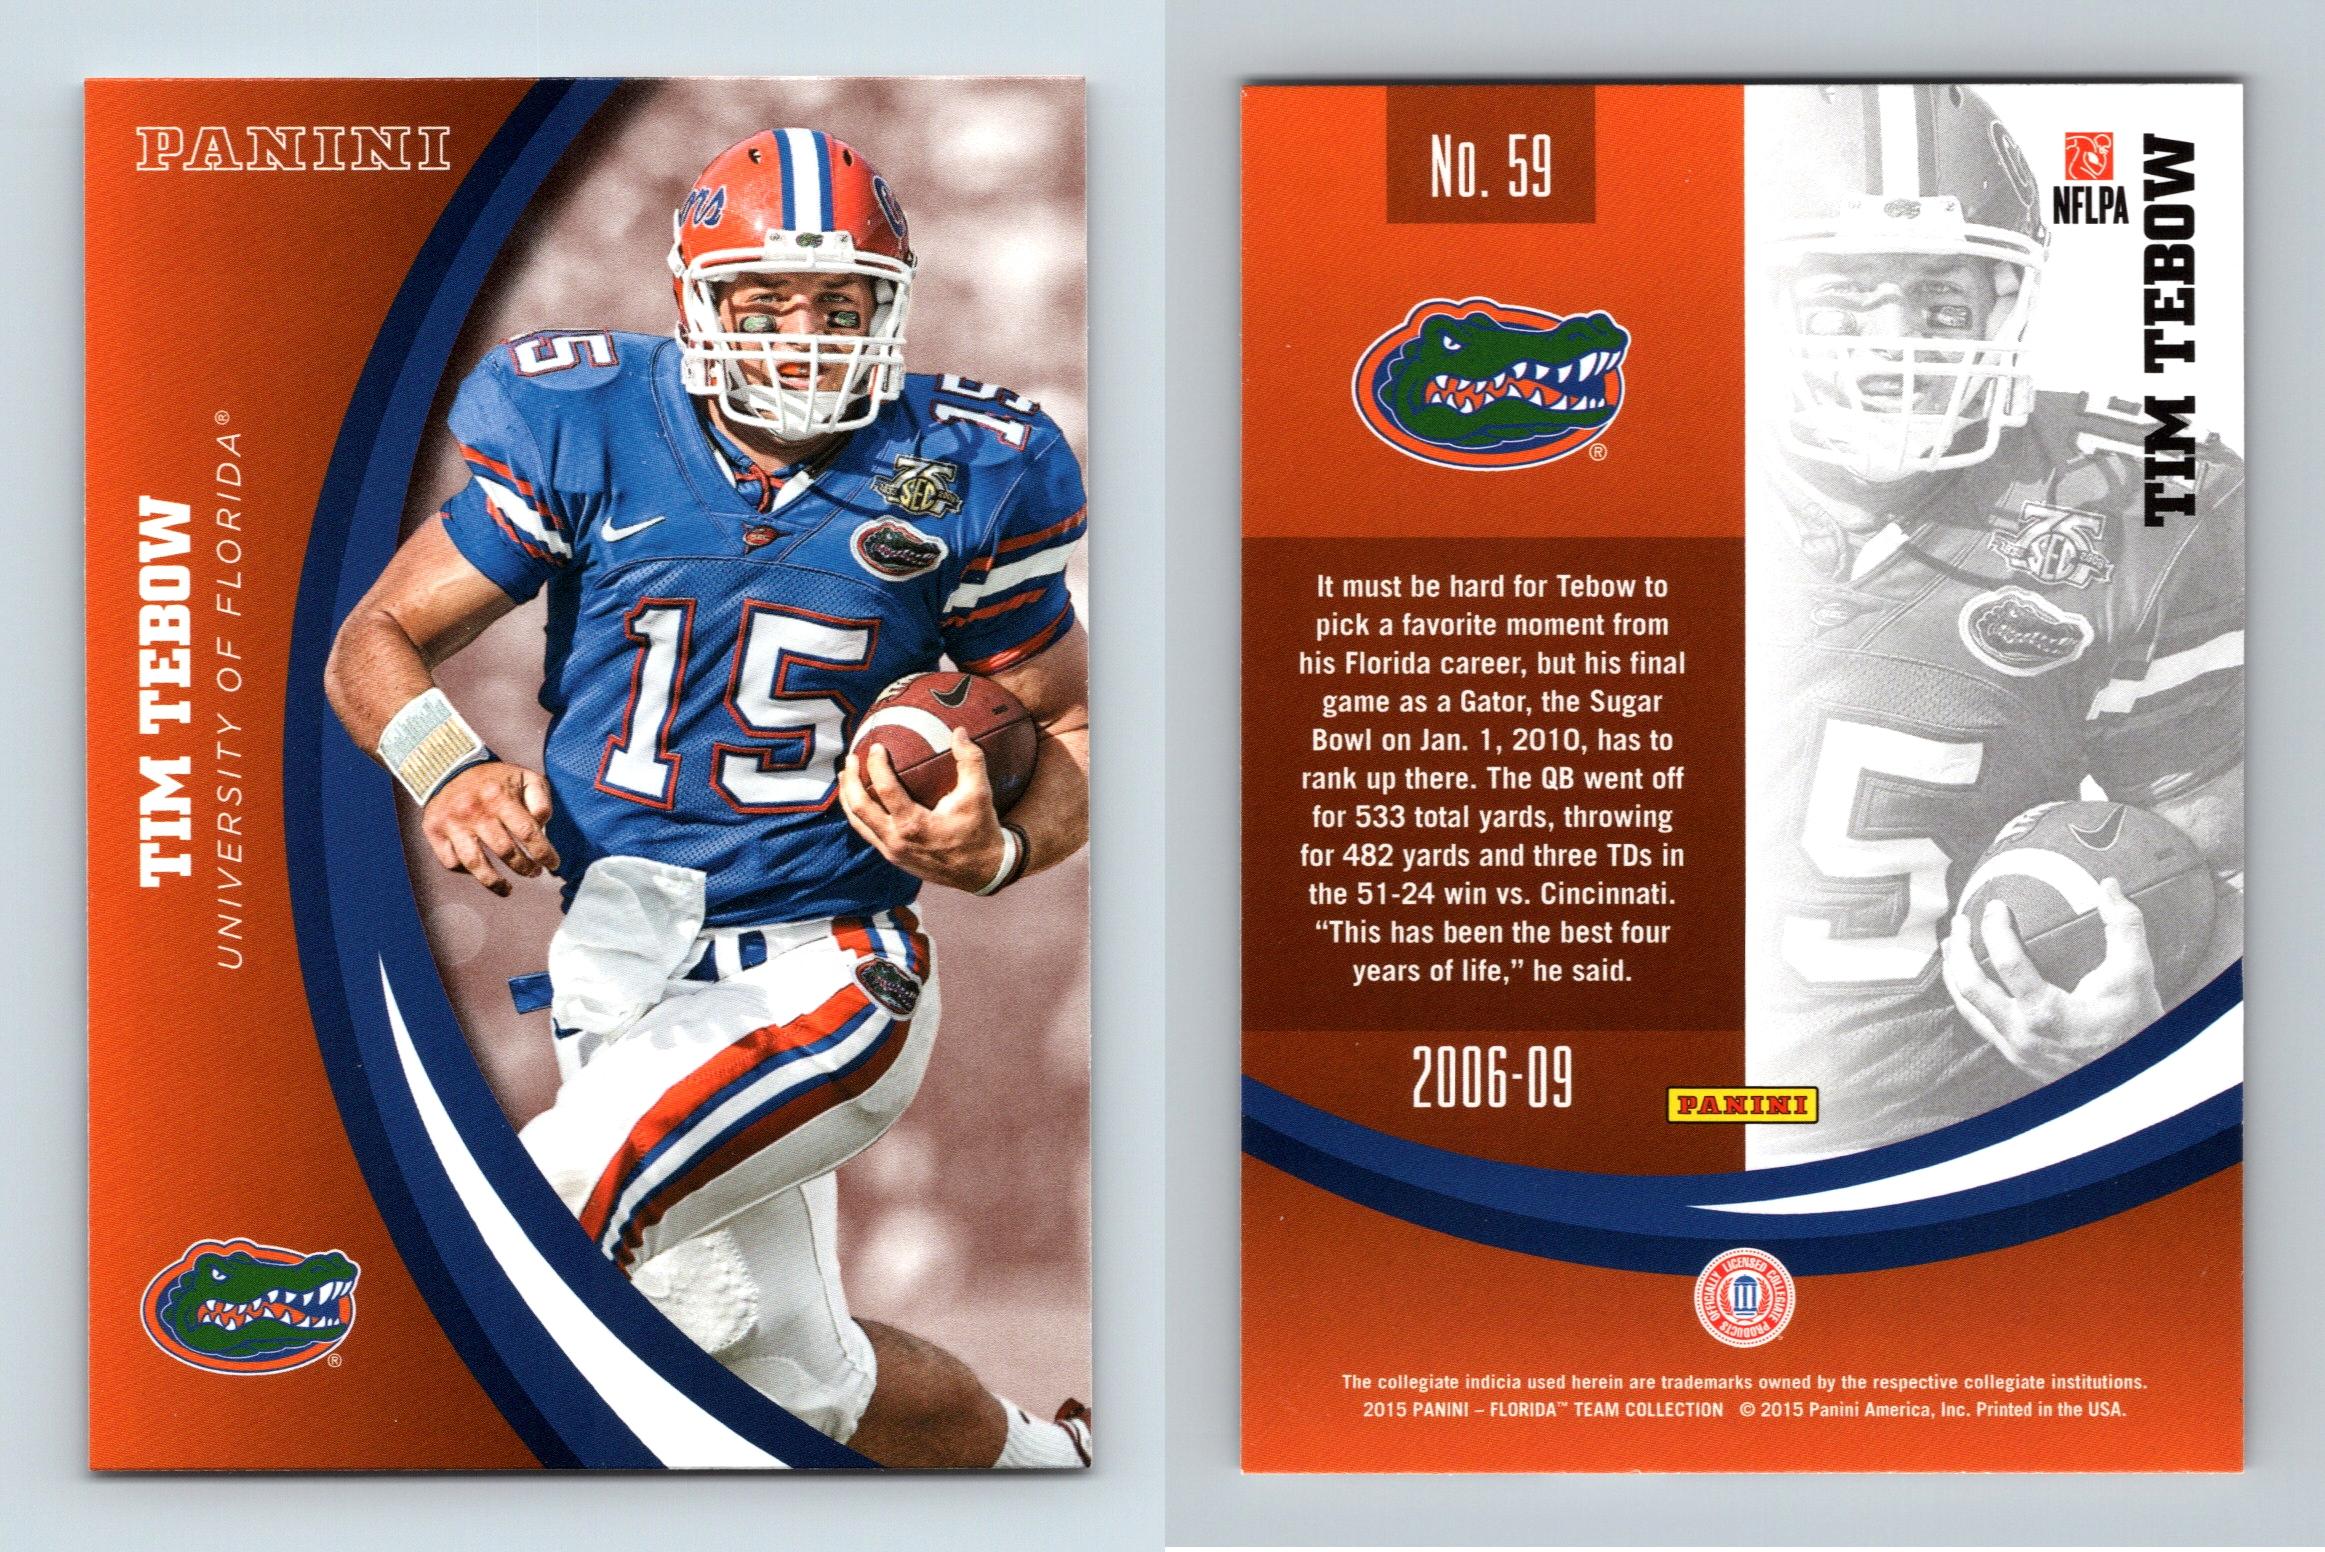 5 memorable Tim Tebow moments with Florida Gators